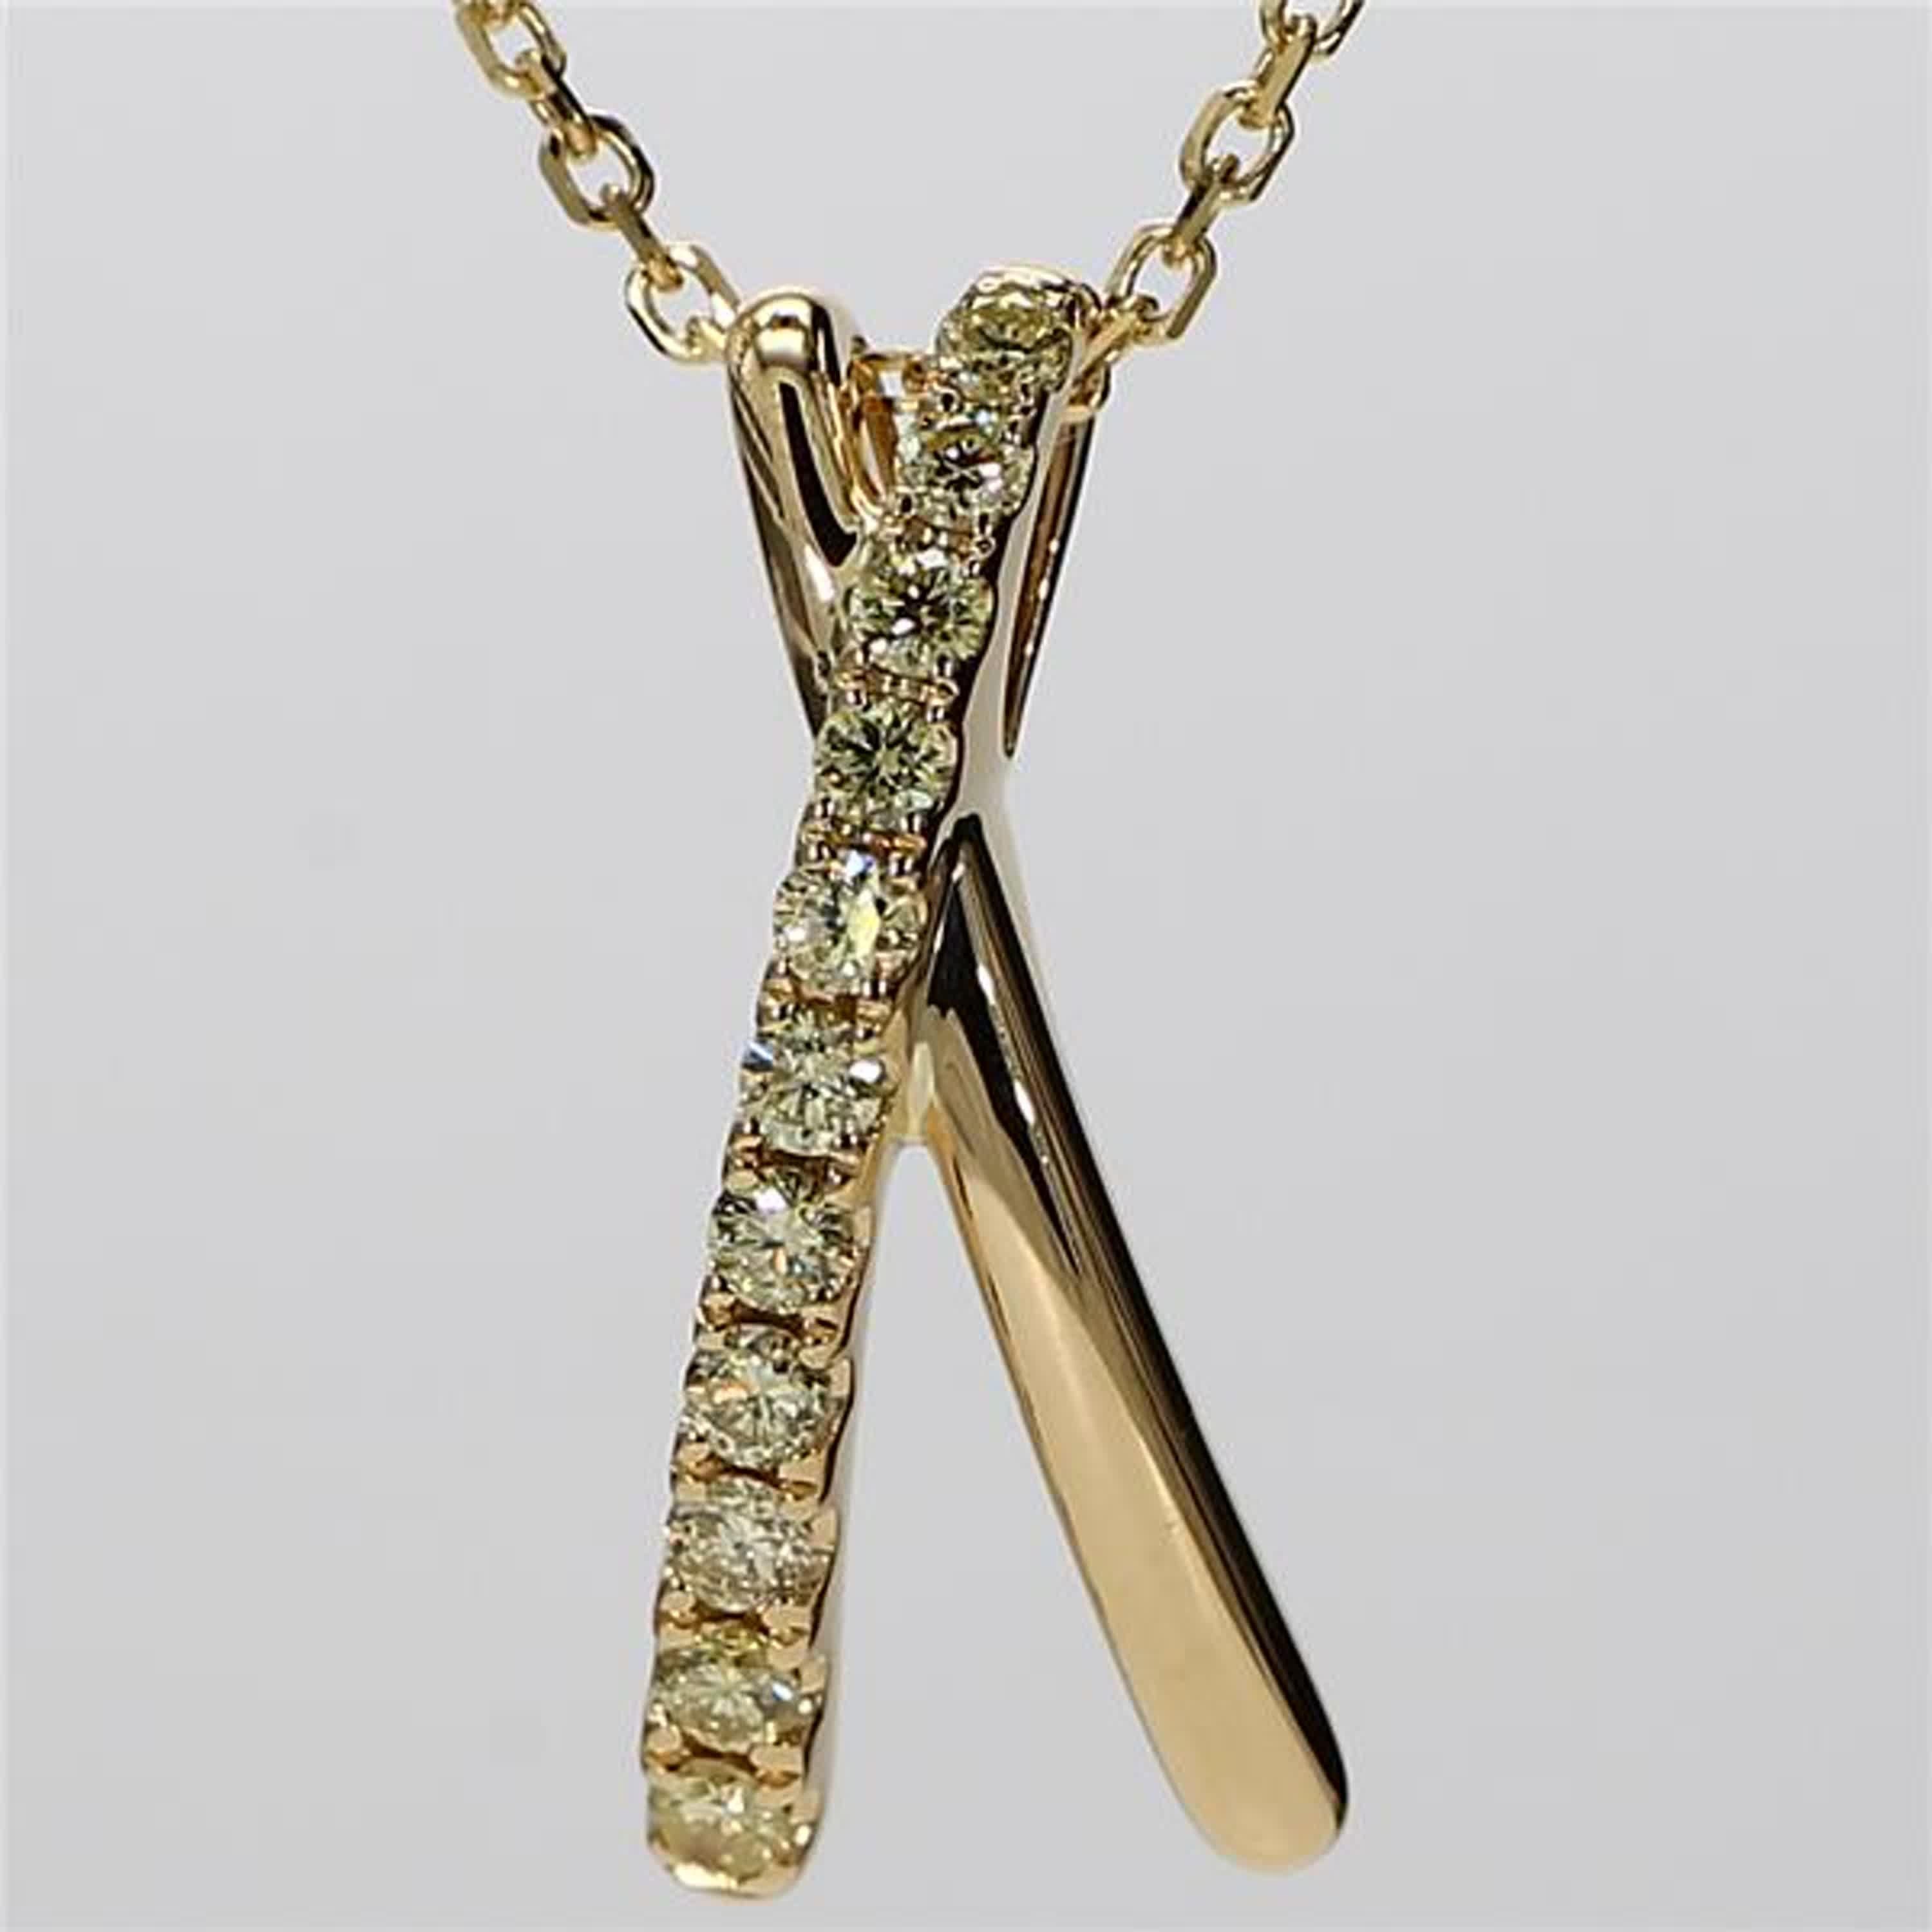 RareGemWorld's classic diamond pendant. Mounted in a beautiful 18K Yellow Gold setting with natural round yellow diamond melee in a beautiful x-shape. This pendant is guaranteed to impress and enhance your personal collection.

Total Weight: